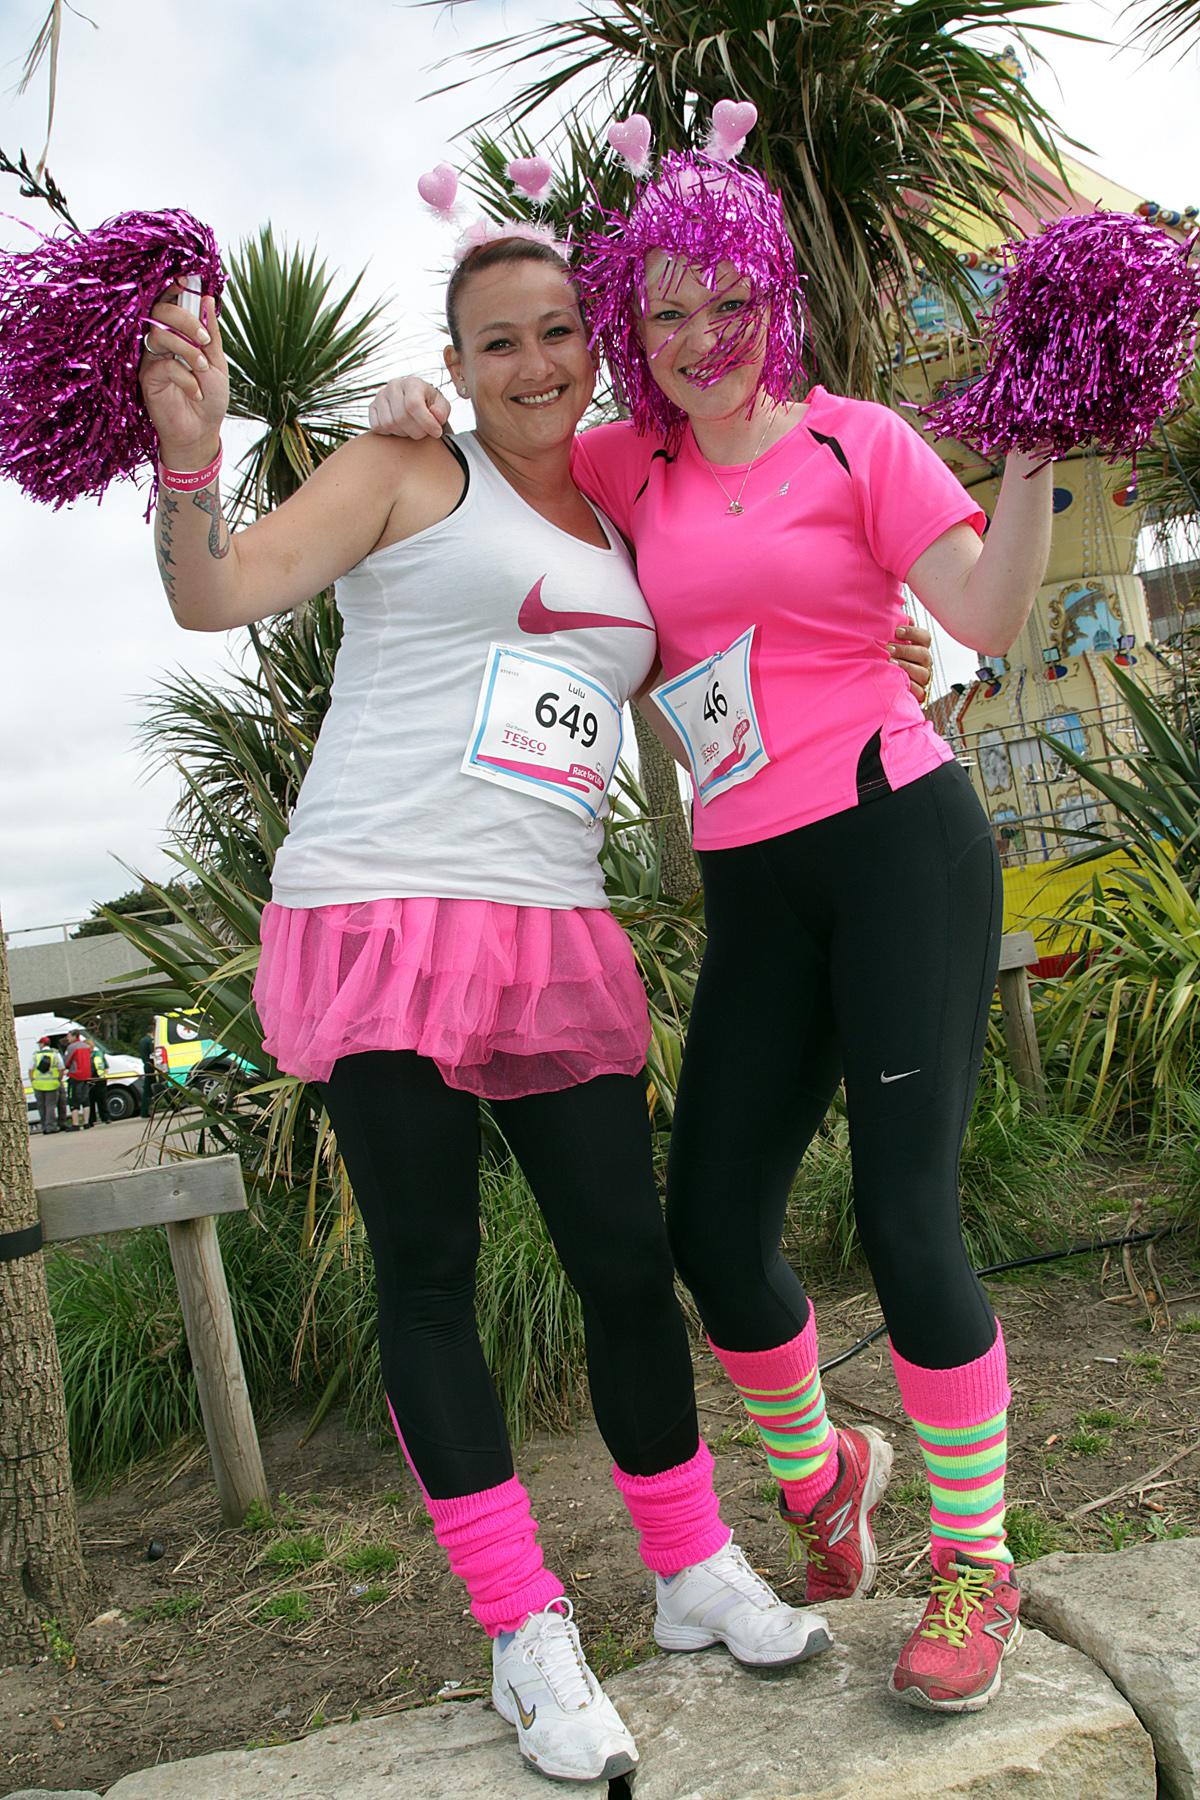 Hundreds of runners turned out for the Bournemouth 5k Race for Life on Sunday